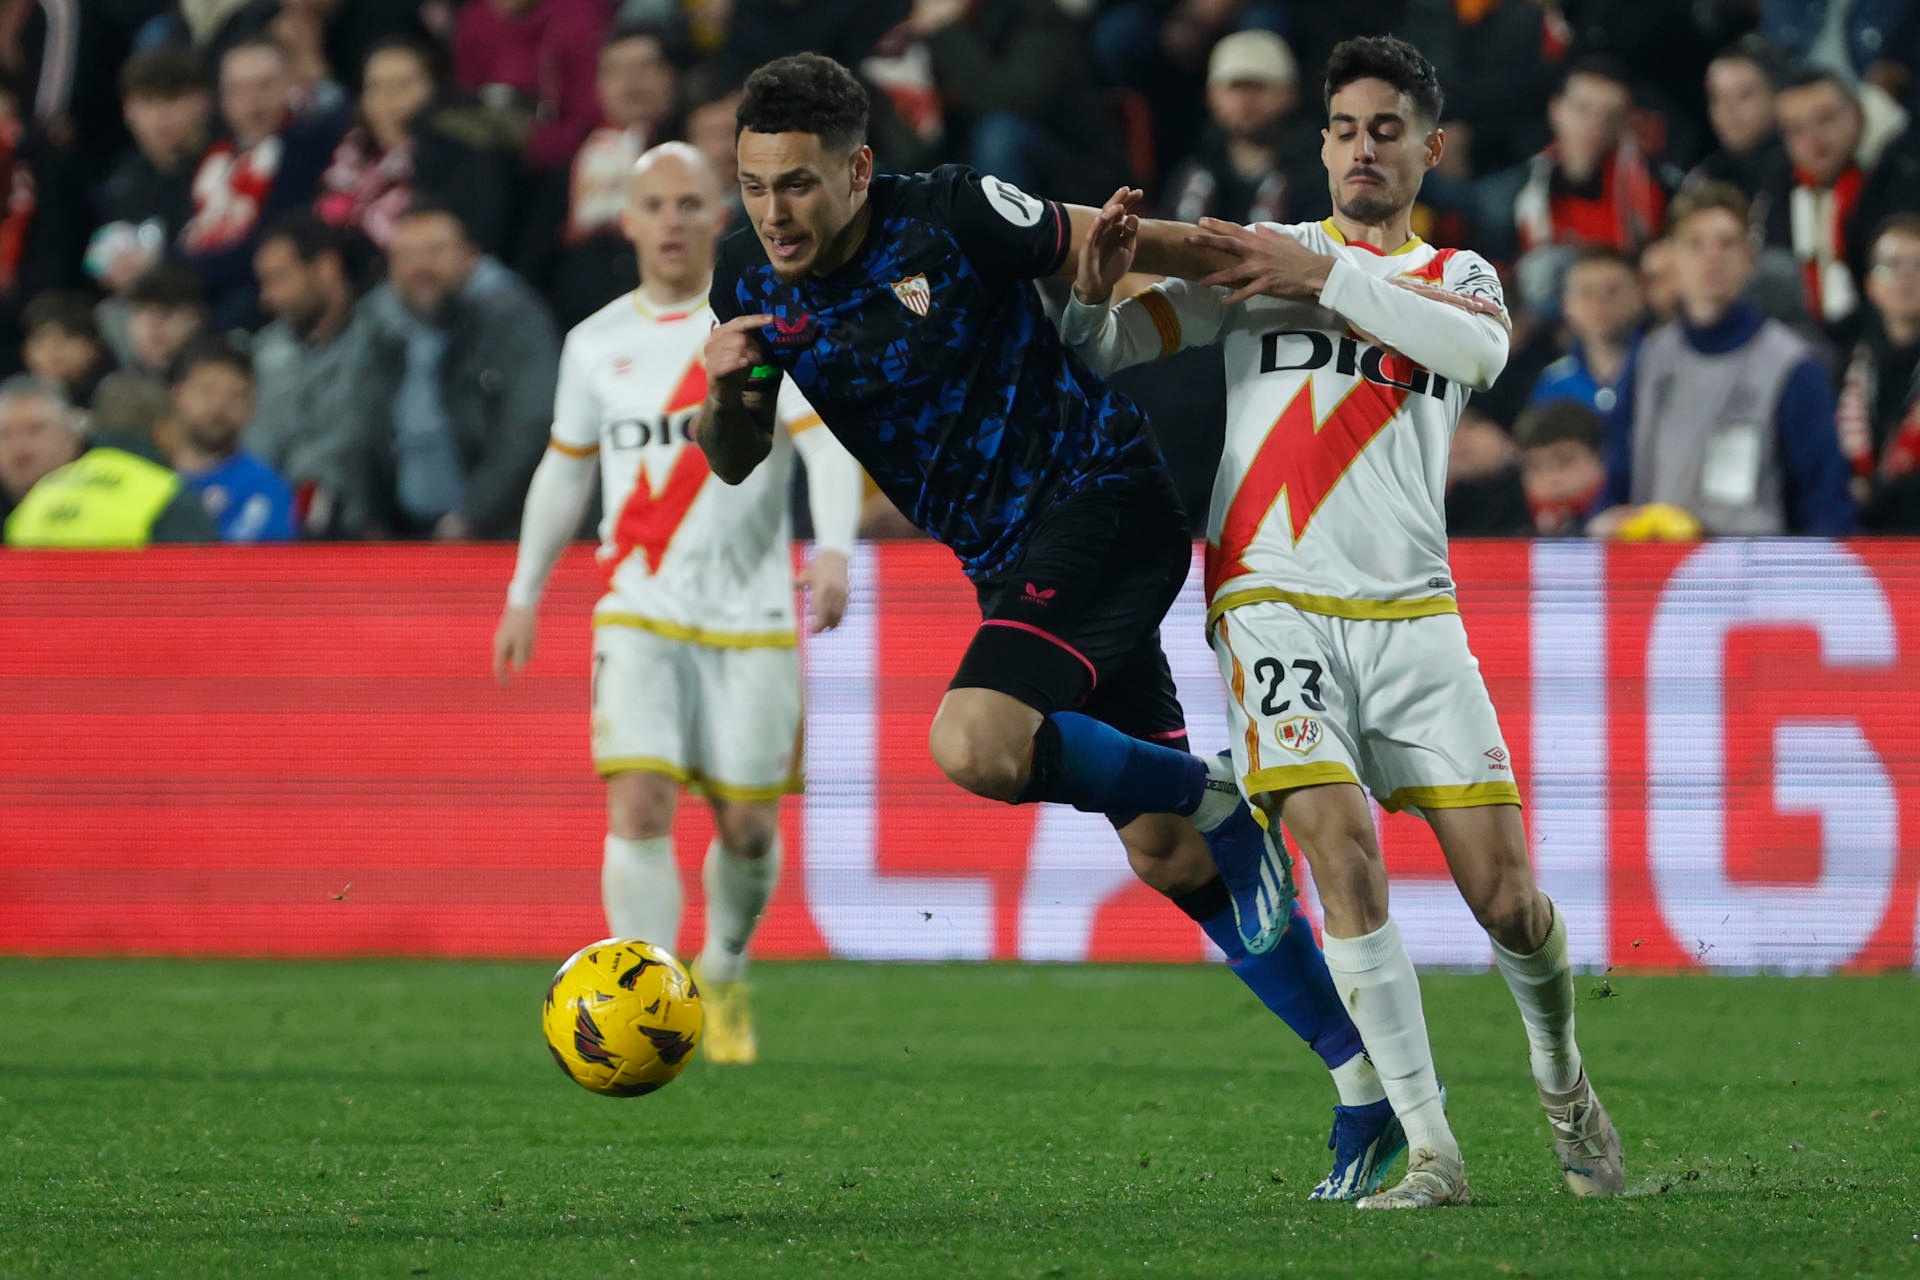 Rayo fan fined €6,000 for assaulting Ocampos